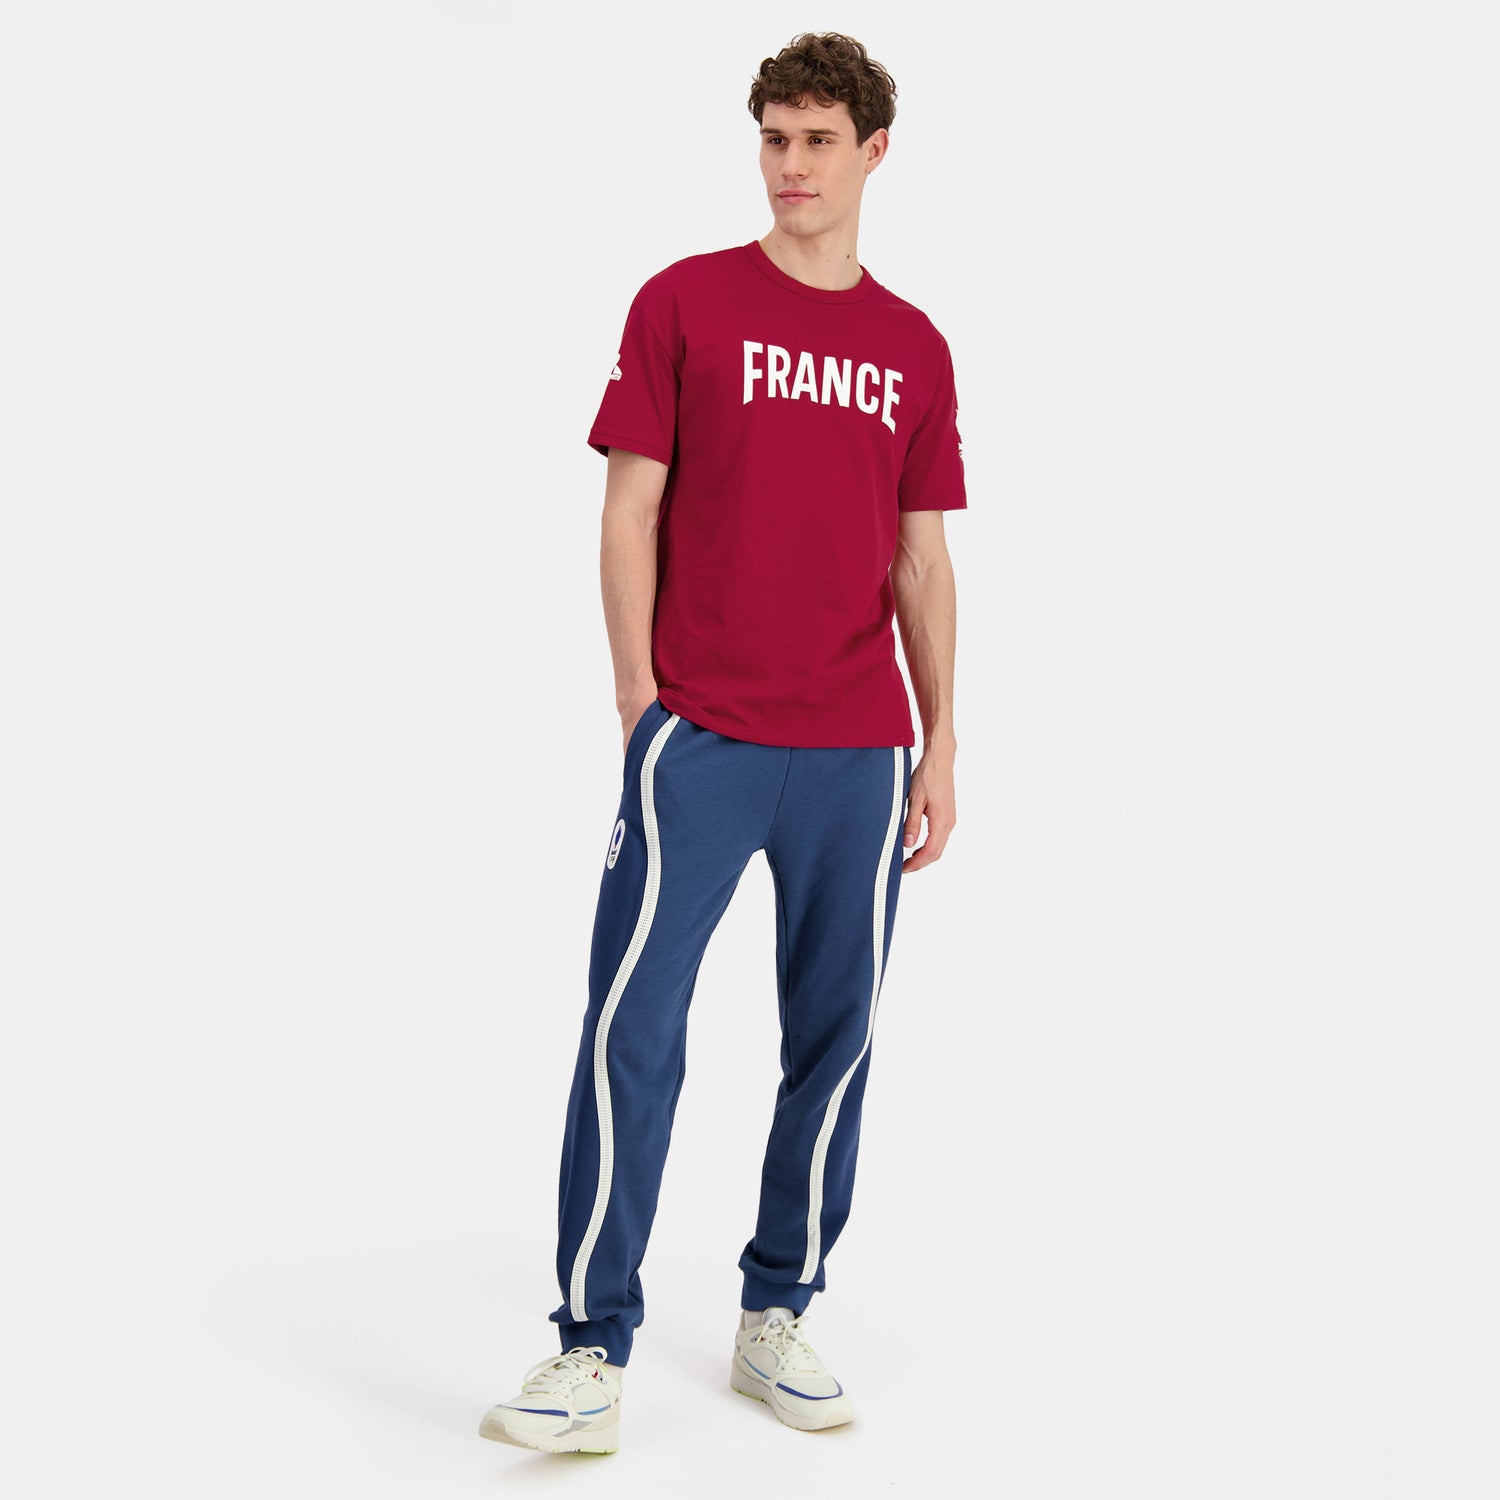 2410043-EFRO 24 Tee SS N°2 M rio red | T-shirt Équipe de France Homme